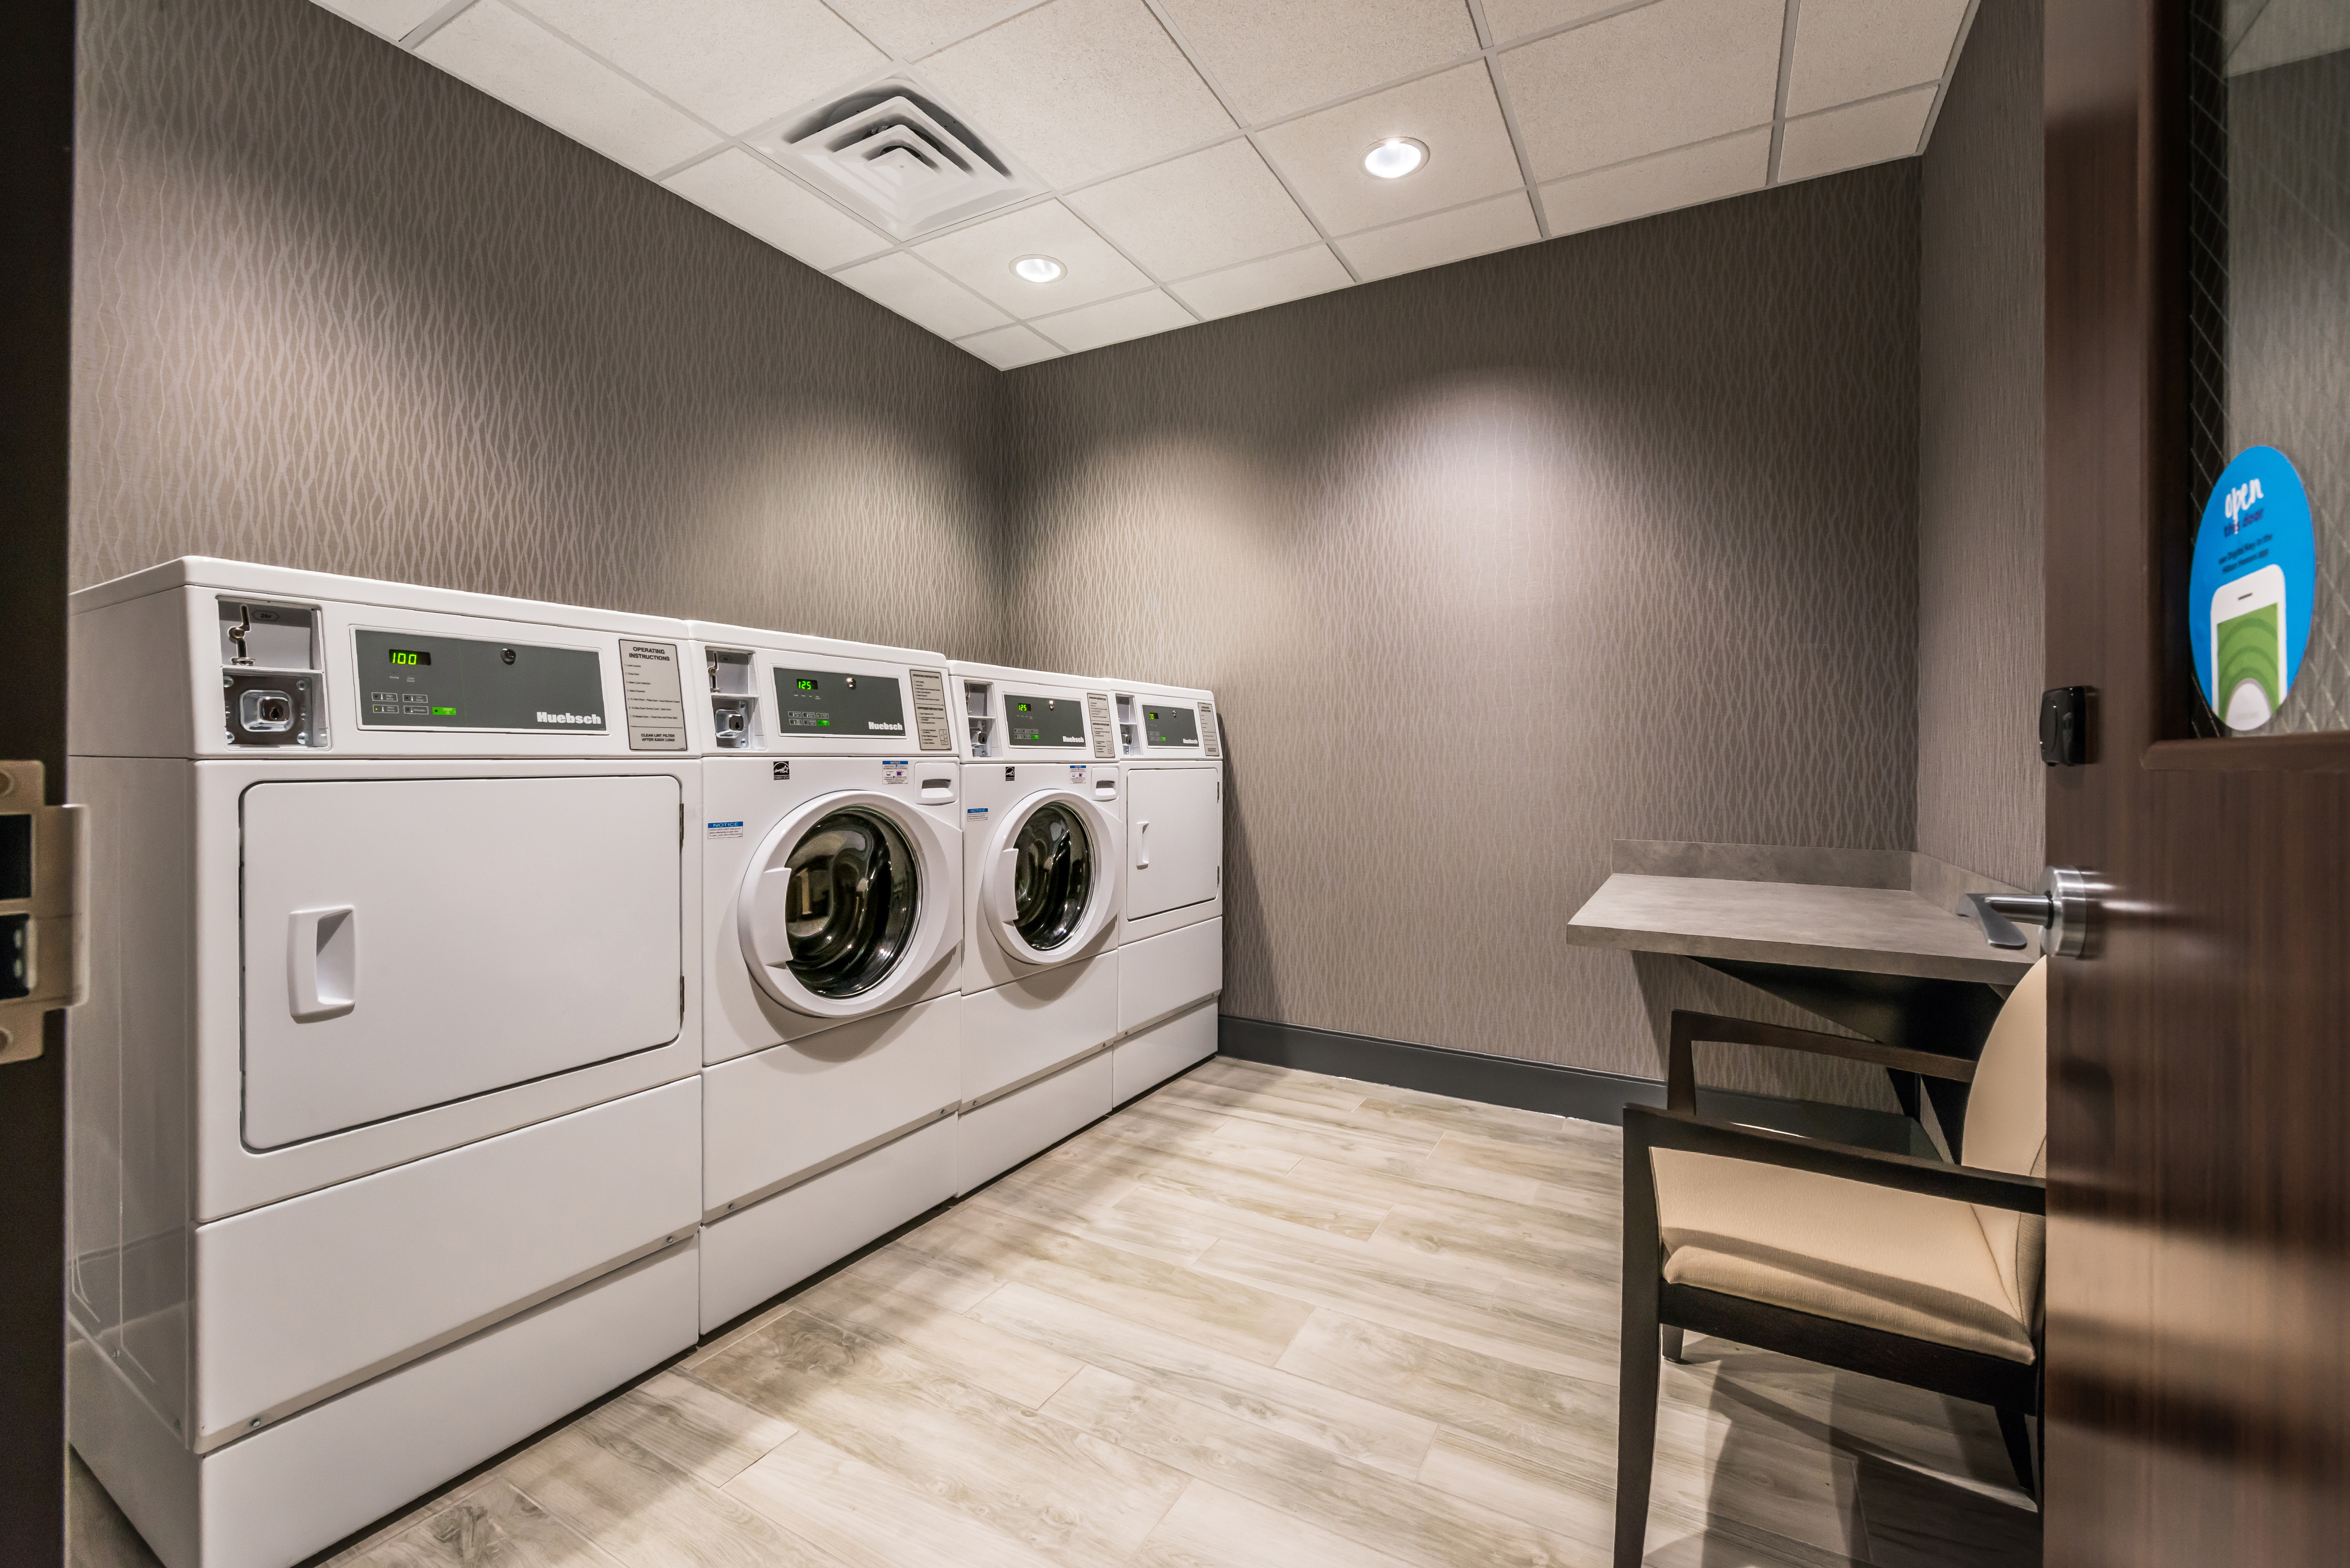 Guest Laundry Facilities Washing Machines and Tumble Dryers